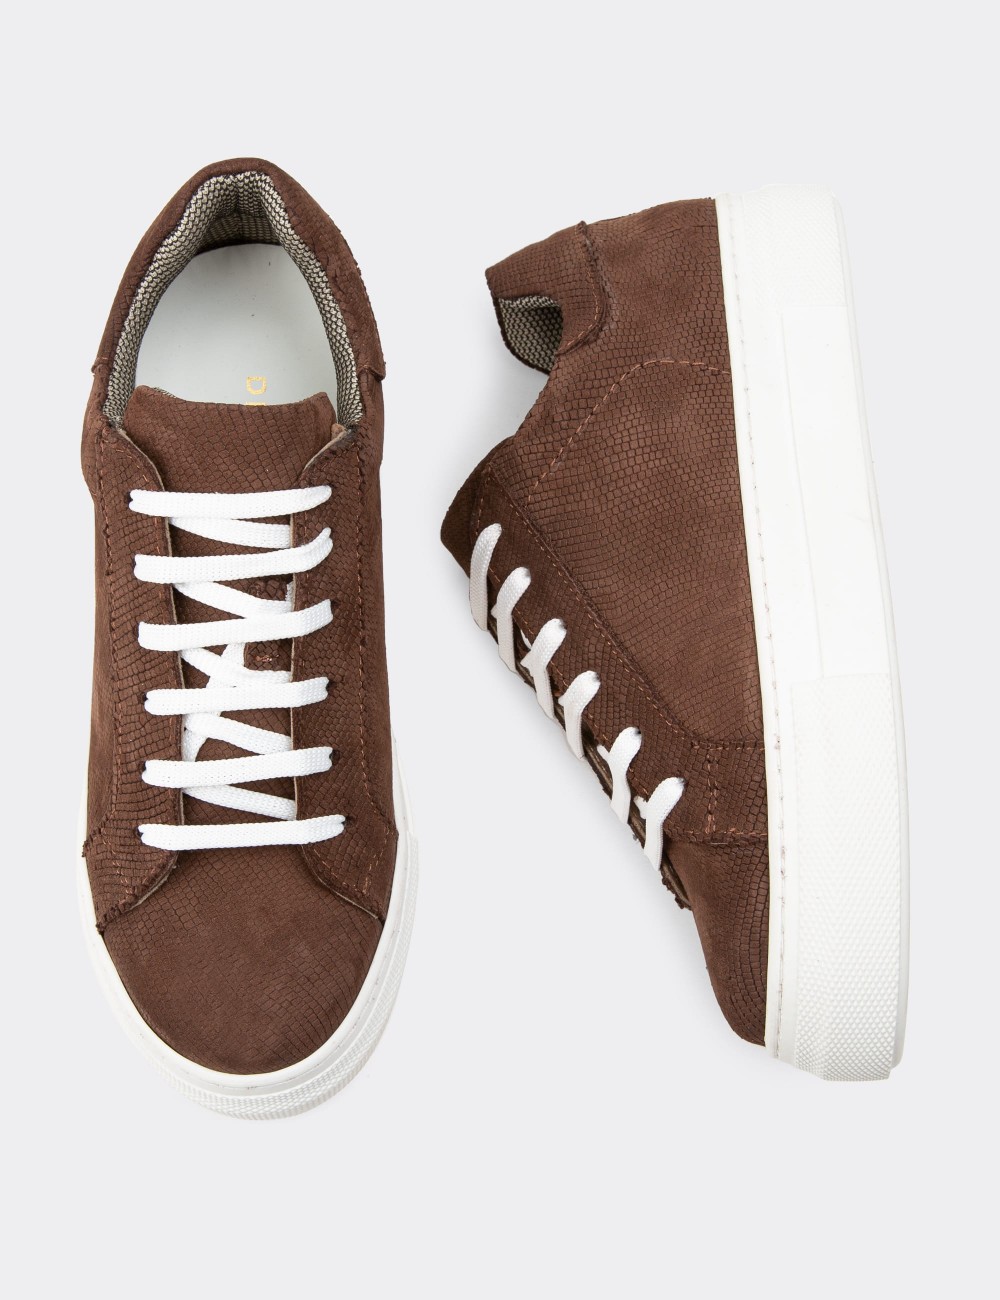 Brown Suede Leather Sneakers - Z1681ZKHVC15